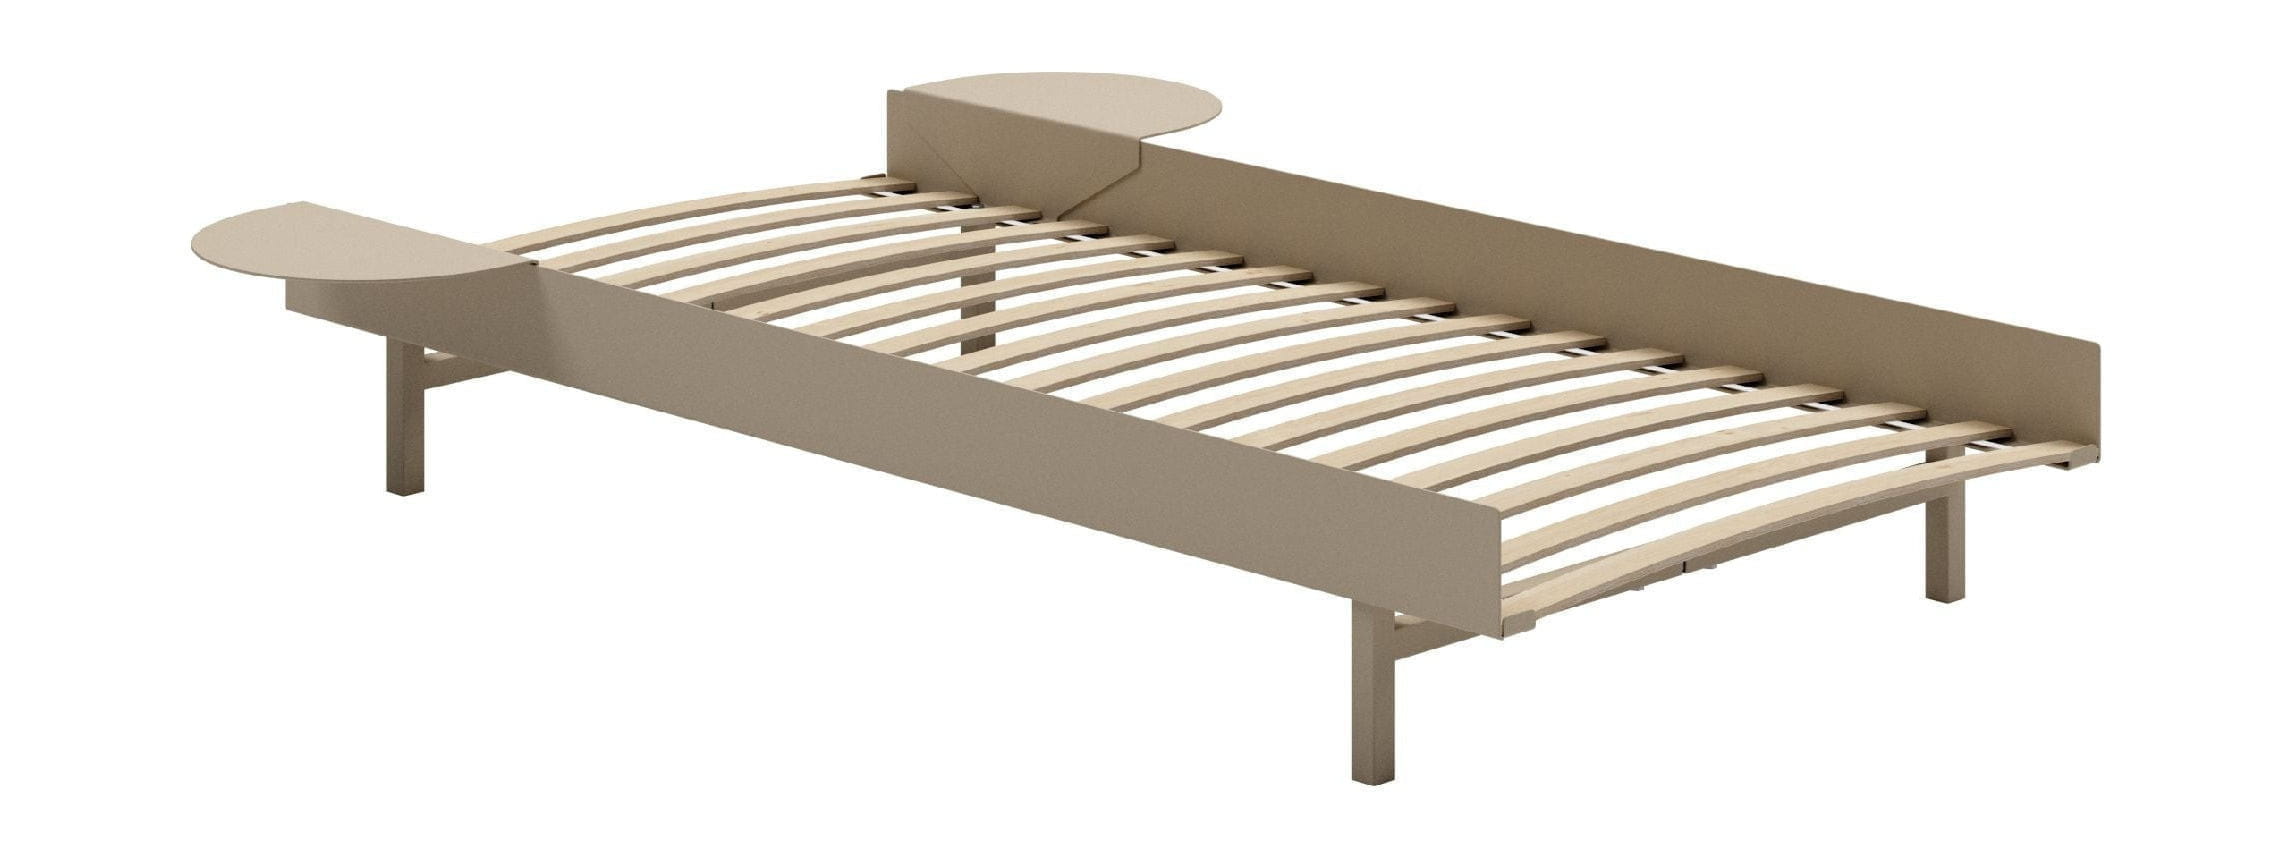 Moebe Bed With Slats And 2 Bedside Tables 90 Cm, Sand